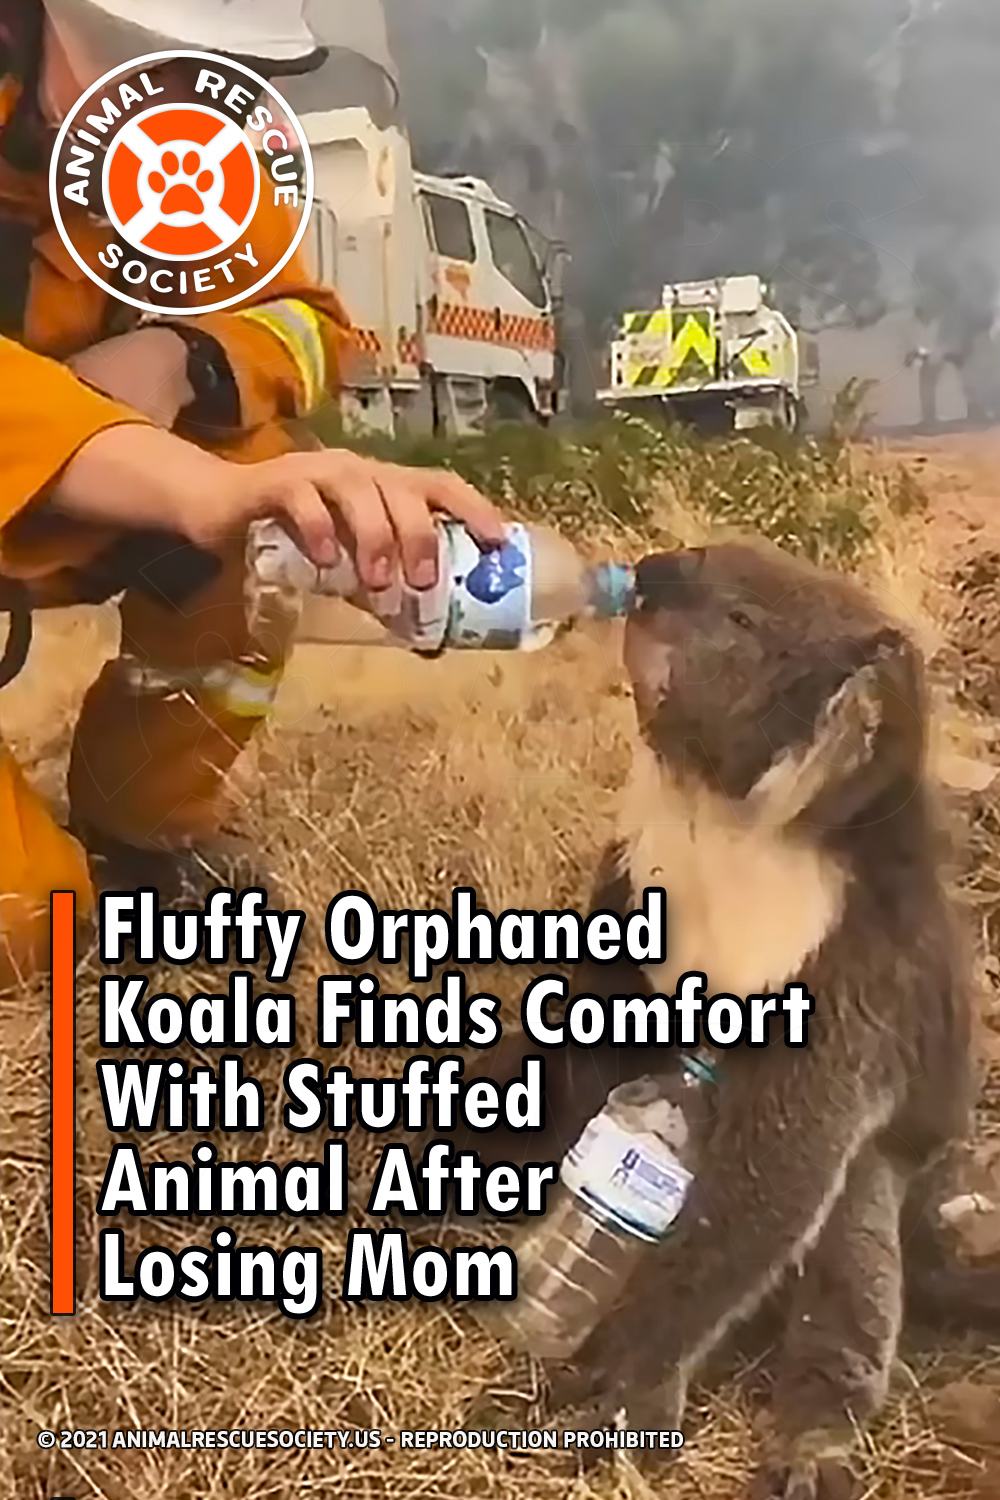 Fluffy Orphaned Koala Finds Comfort With Stuffed Animal After Losing Mom